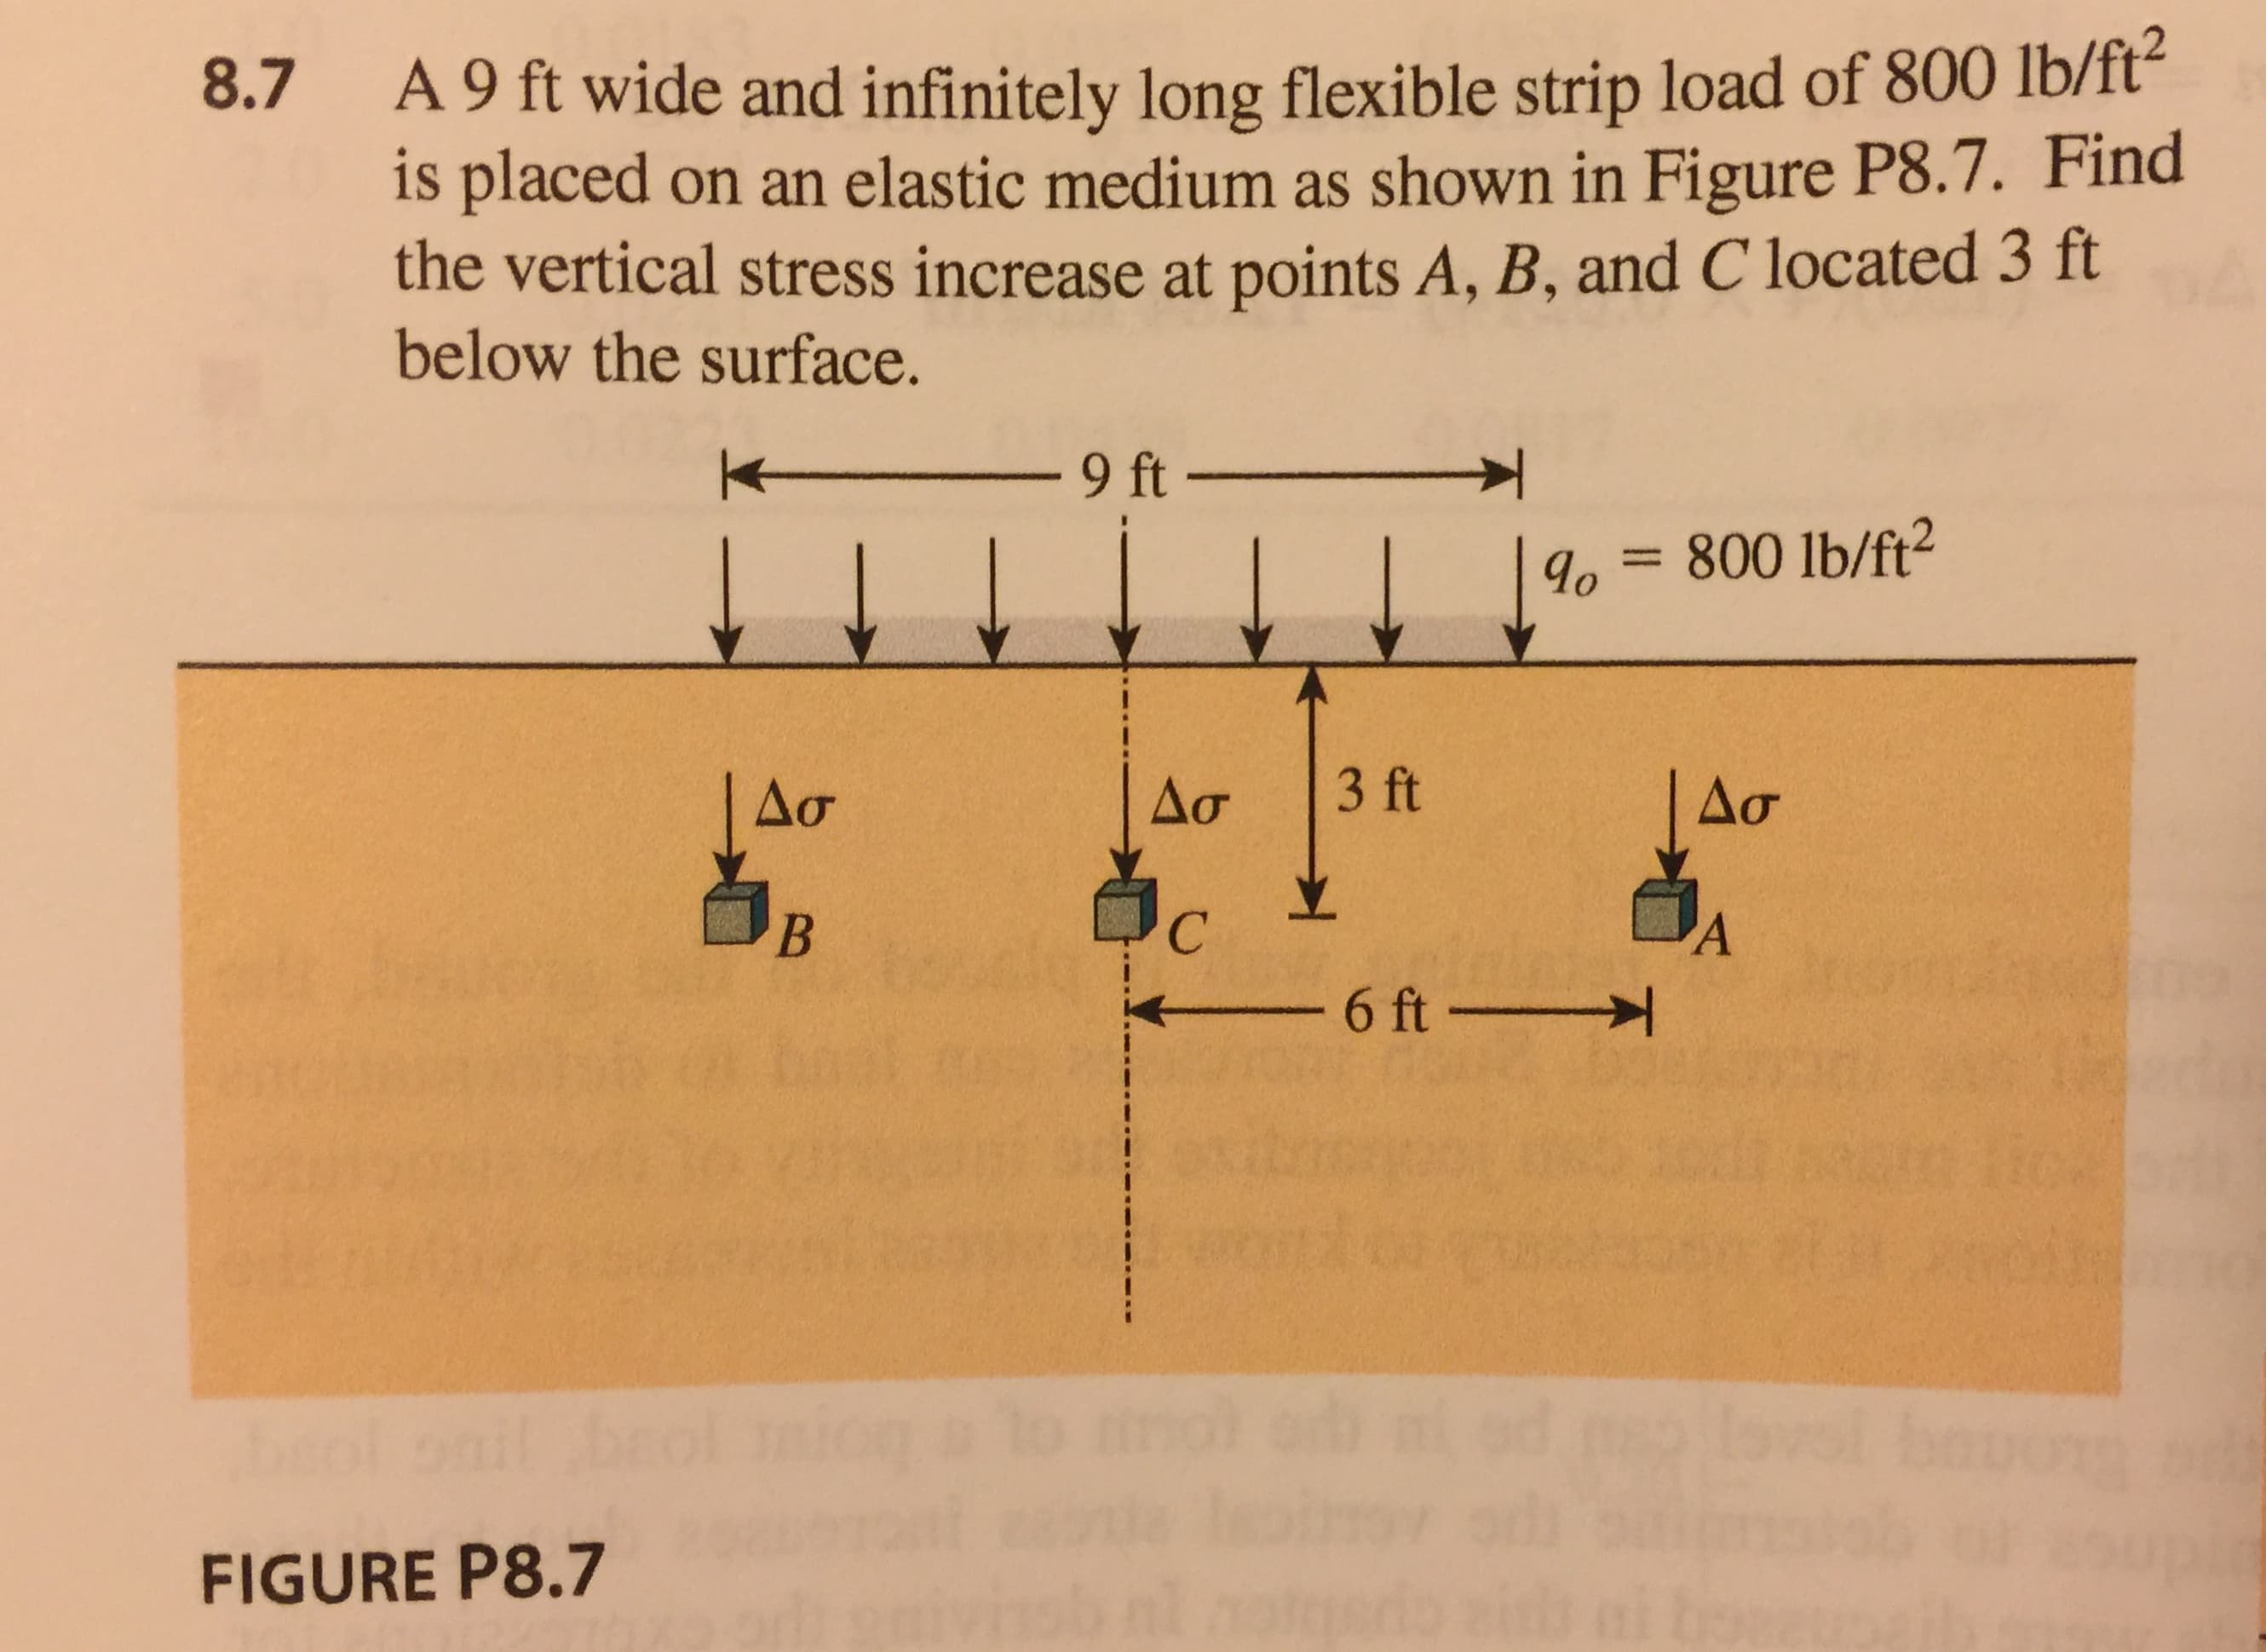 8.7 A9 ft wide and infinitely long flexible strip load of 800 lb/ft
is placed on an elastic medium as shown in Figure P8.7. Find
the vertical stress increase at points A, B, and C located 3 ft
below the surface.
o 800 lb/ft2
6 ft
FIGURE P8.7
